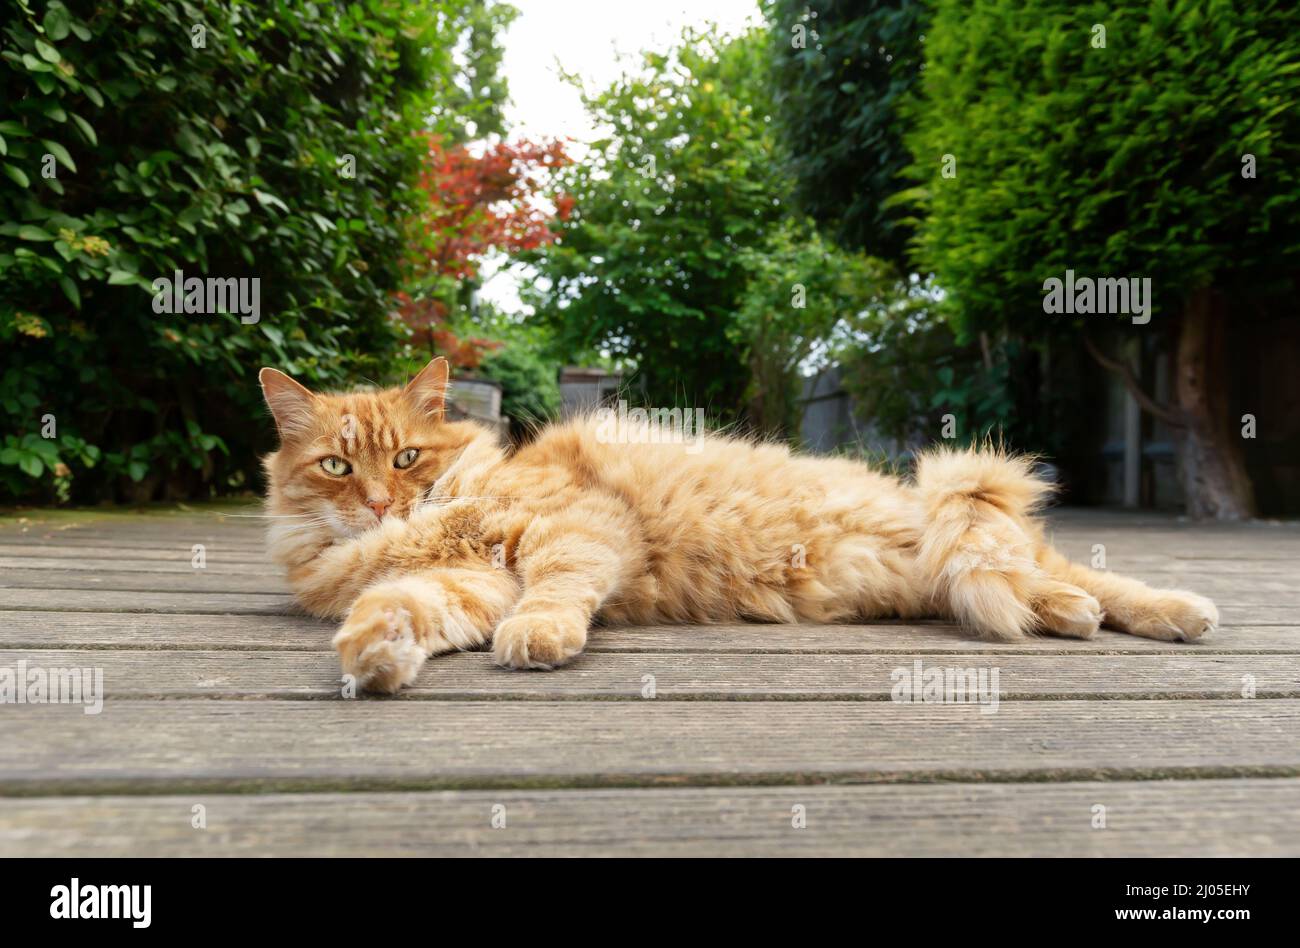 Close-up of a ginger cat lying on the wooden patio decking in a garden, UK. Stock Photo